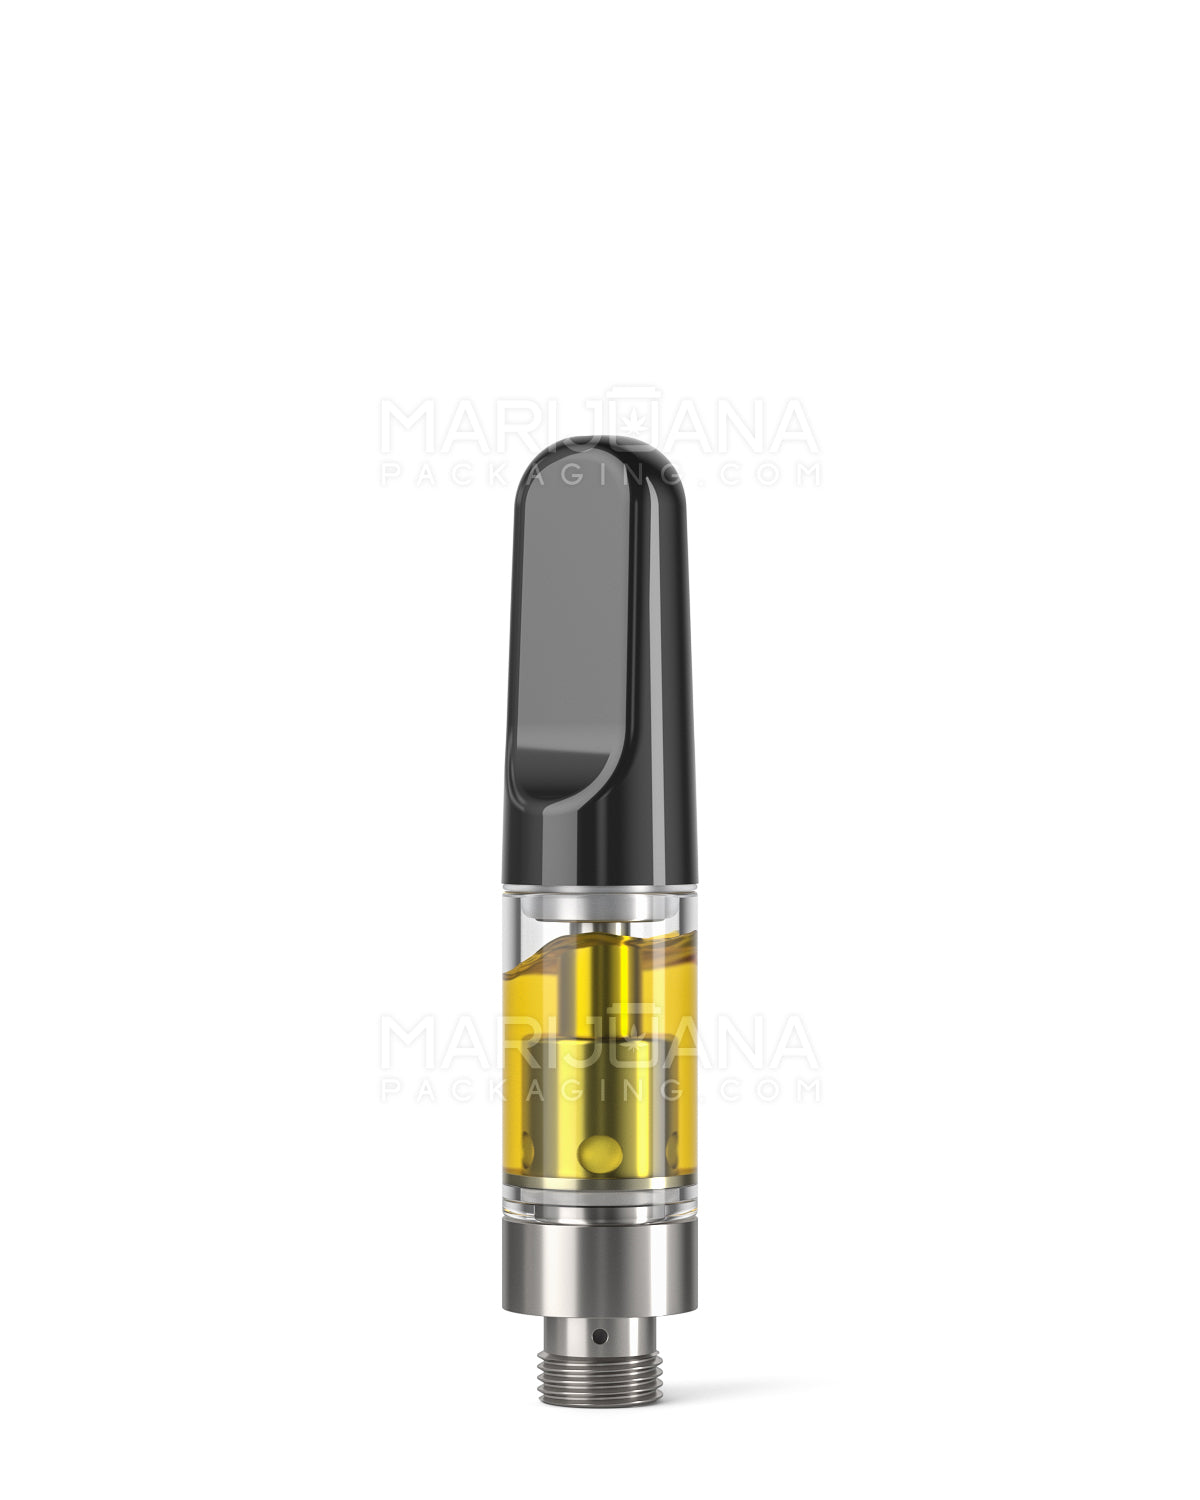 CCELL | Liquid6 Reactor Glass Vape Cartridge with Black Ceramic Mouthpiece | 0.5mL - Screw On - 100 Count - 2